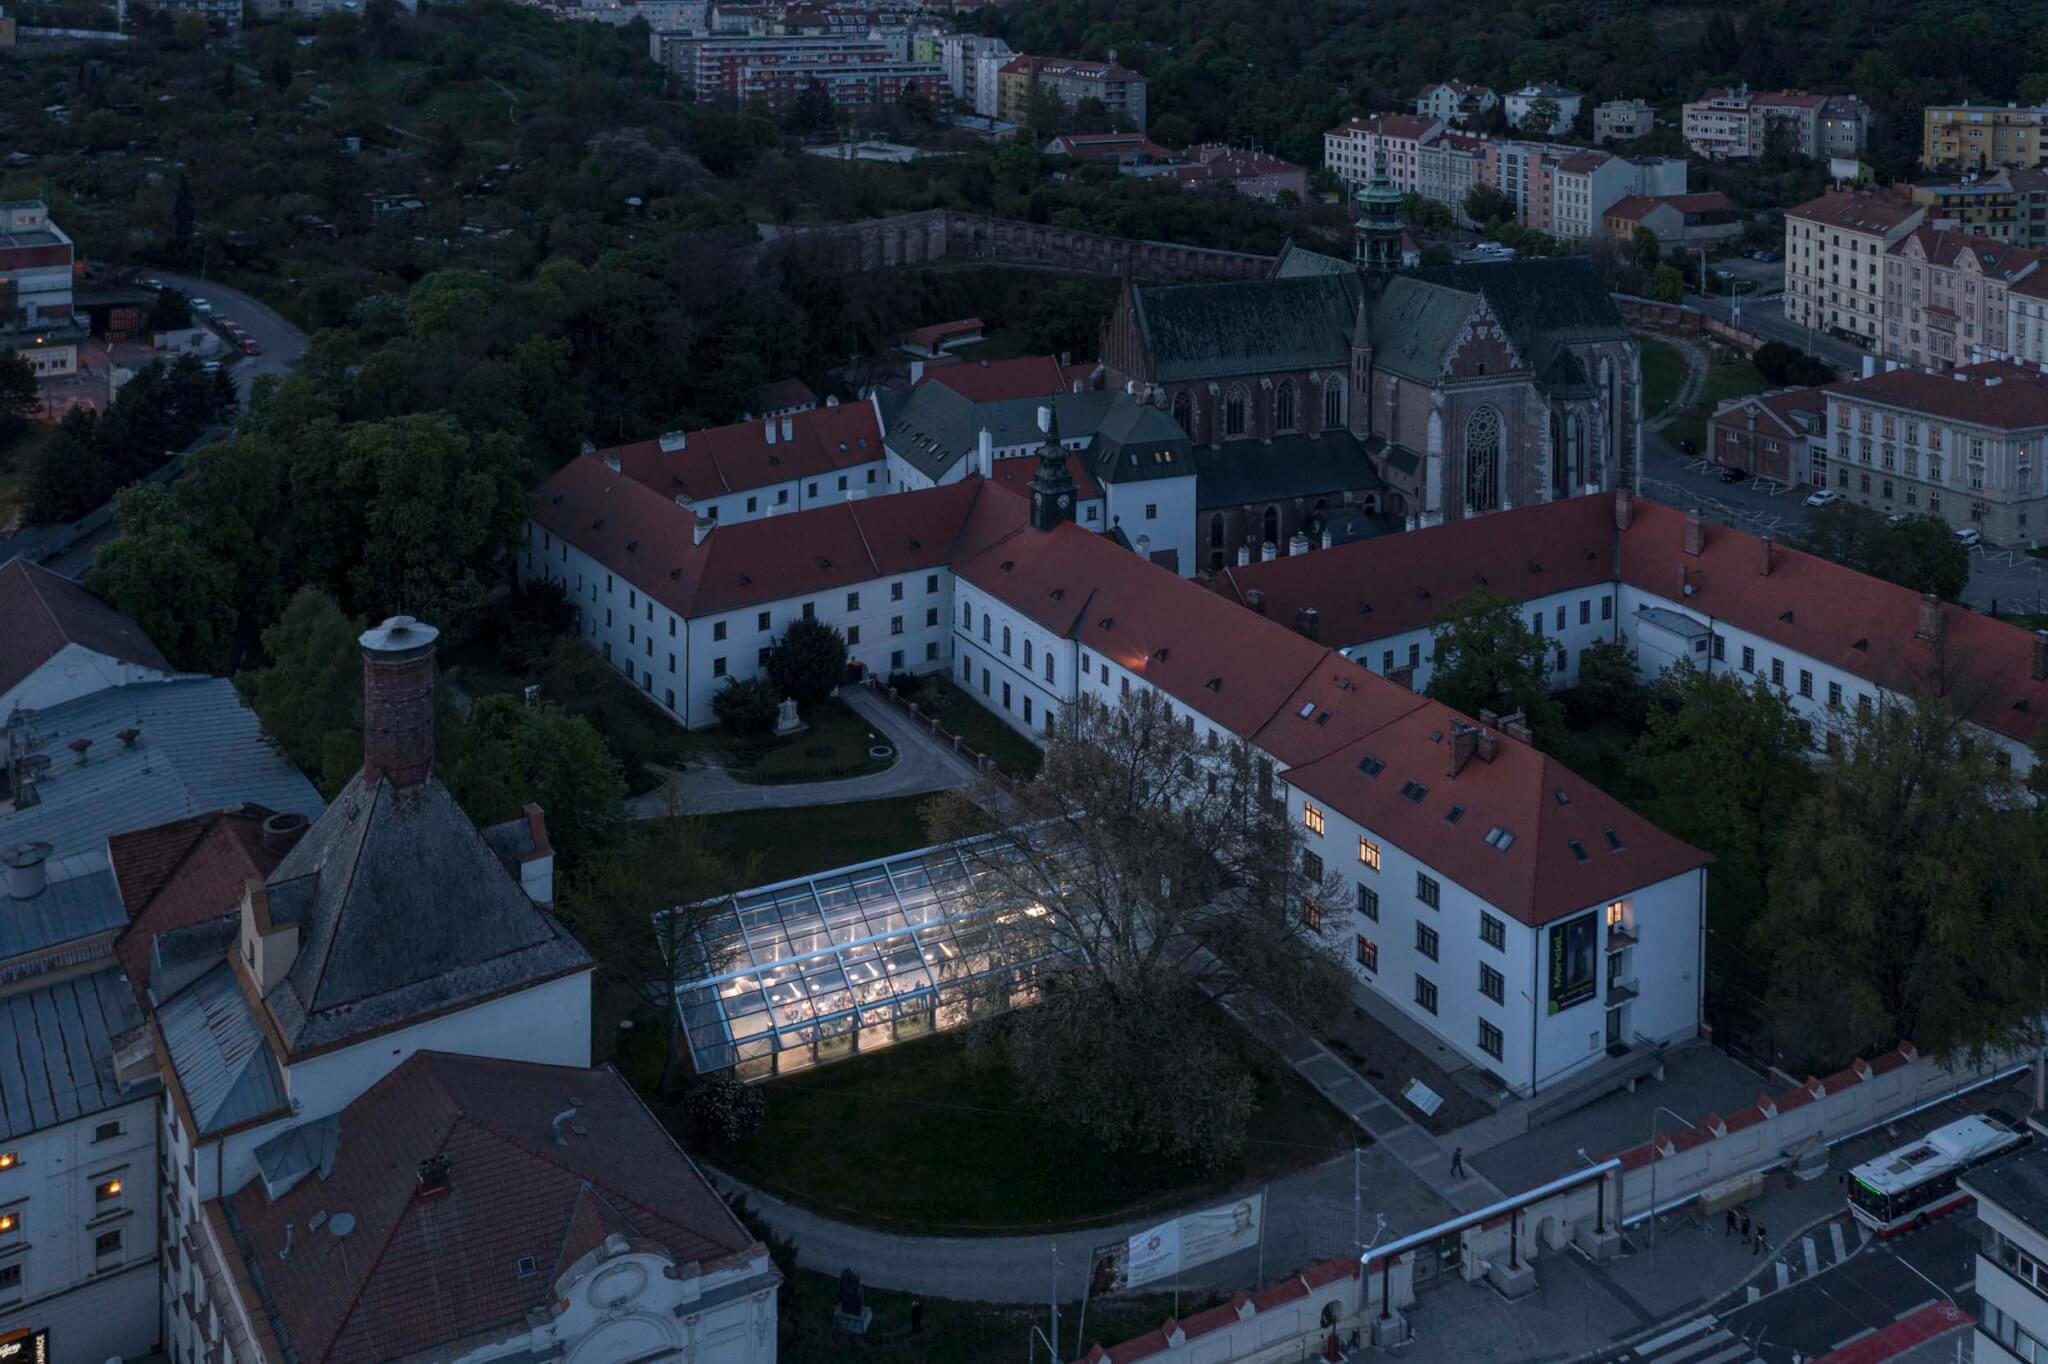 aerial view of greenhouse lit up next to historic abbey